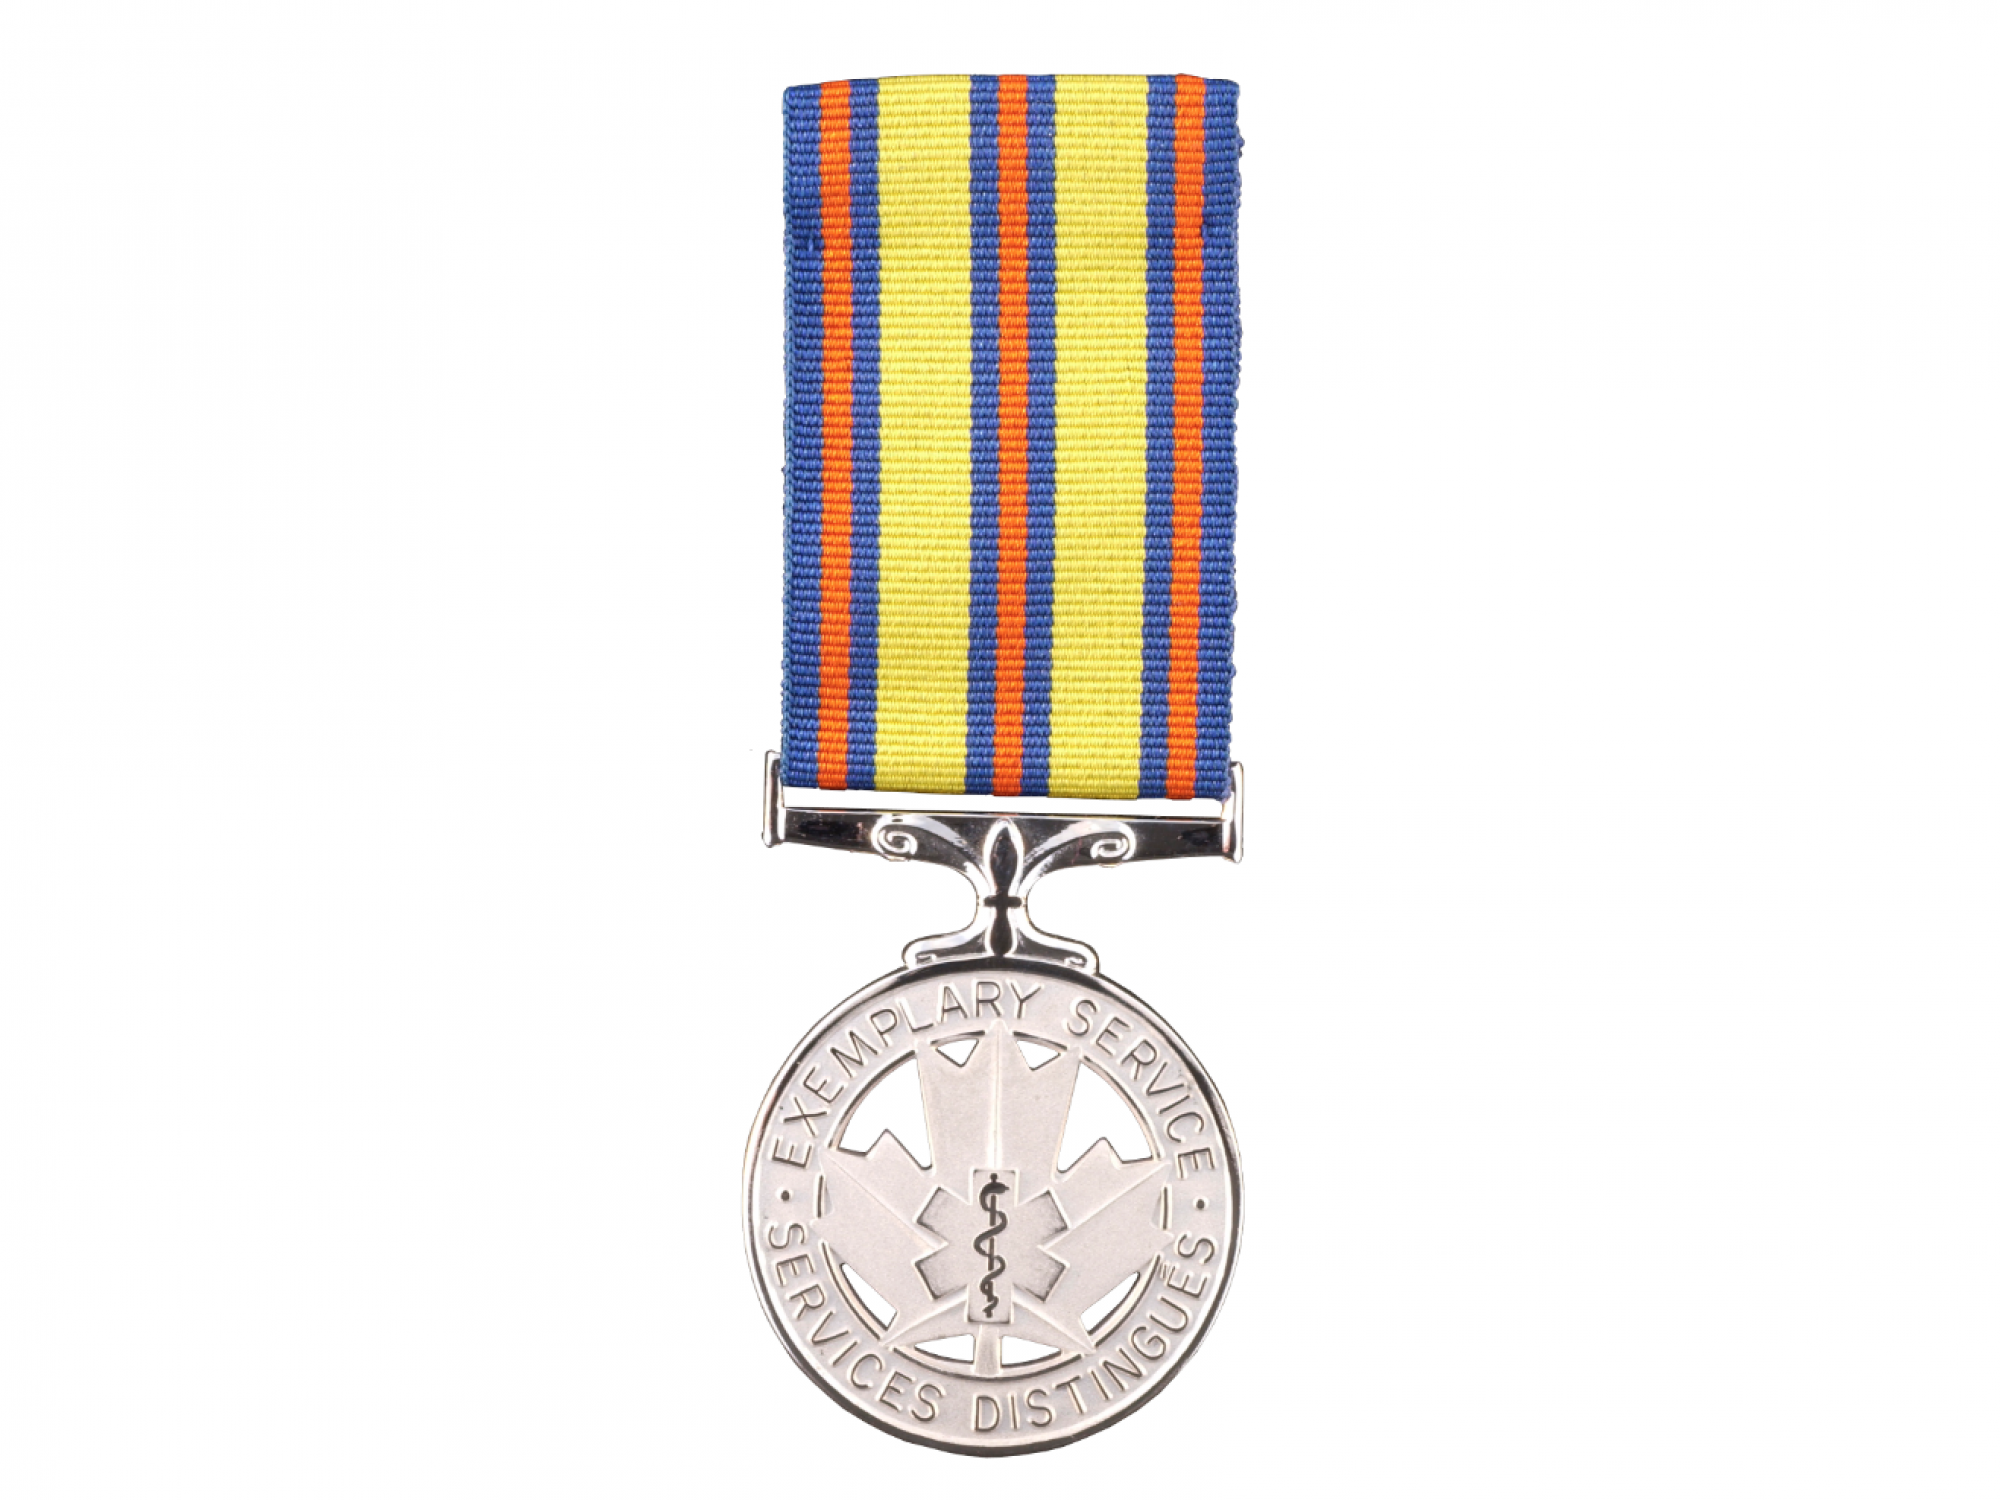 Photo showing the Exemplary Service Medal